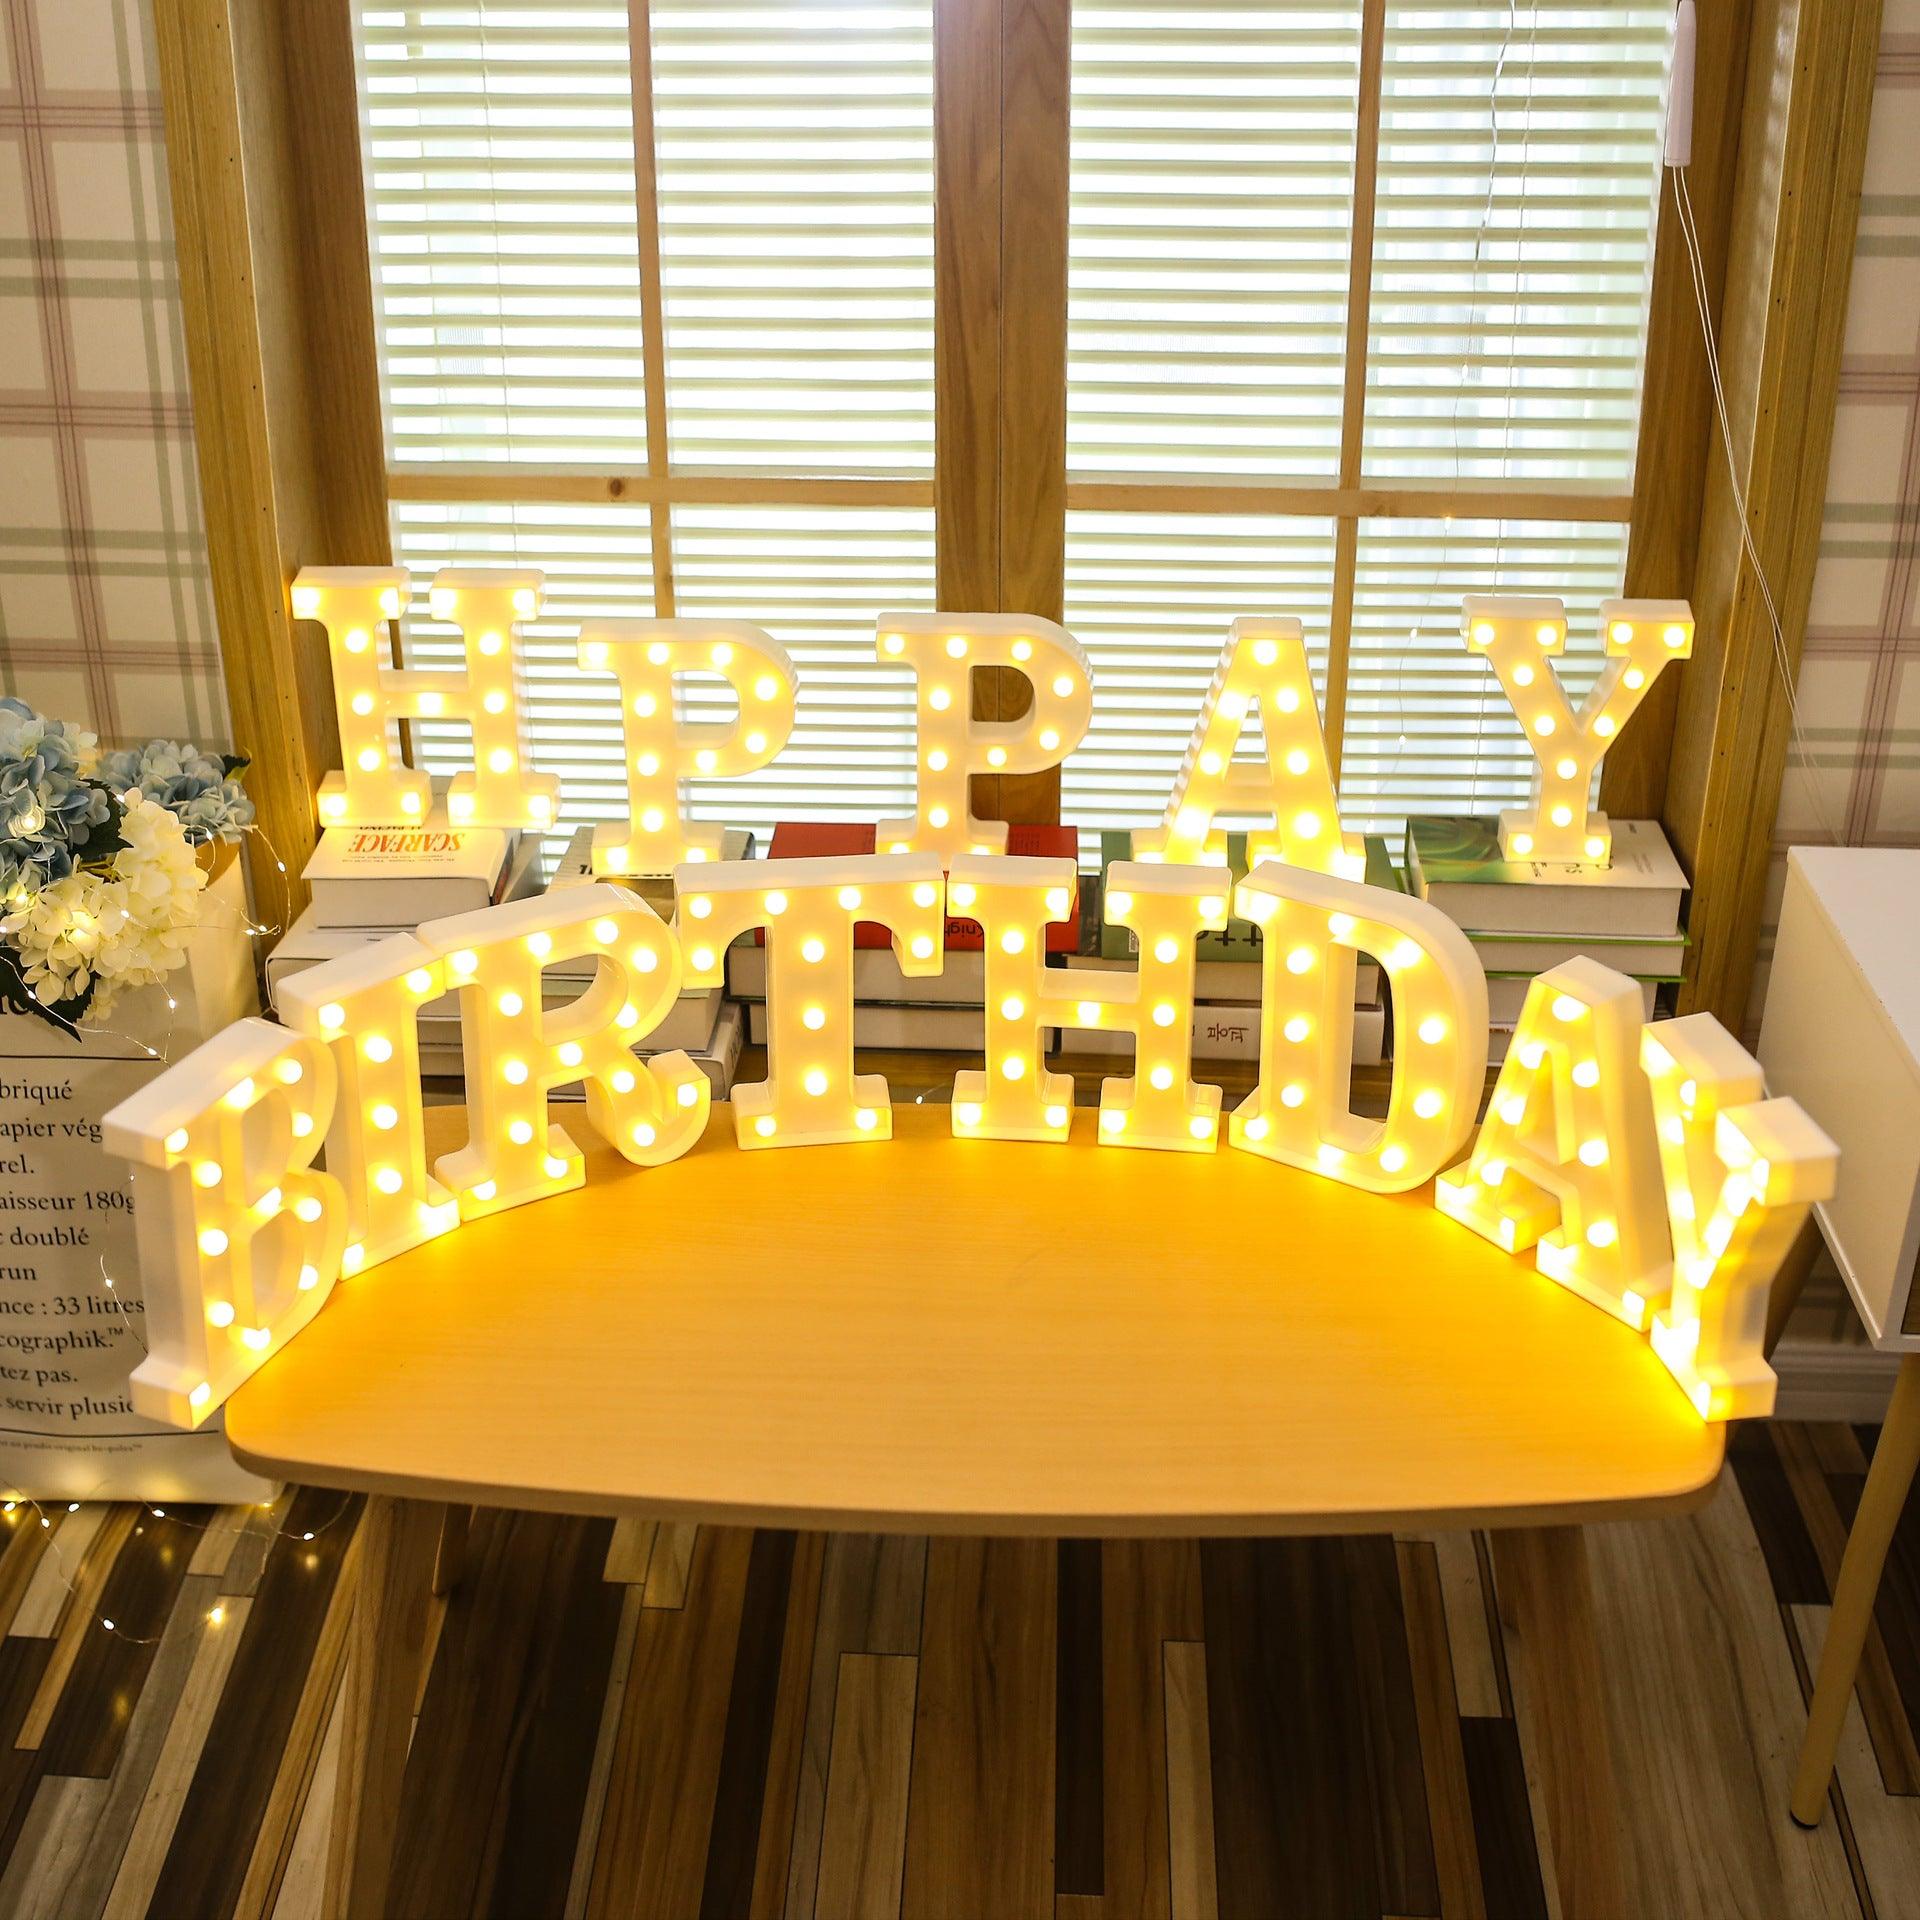 Battery Powered LED Letter Lights Sign Light Up Letters Sign for Night Light Wedding/Birthday Party Christmas Lamp Home Decoration - If you say i do